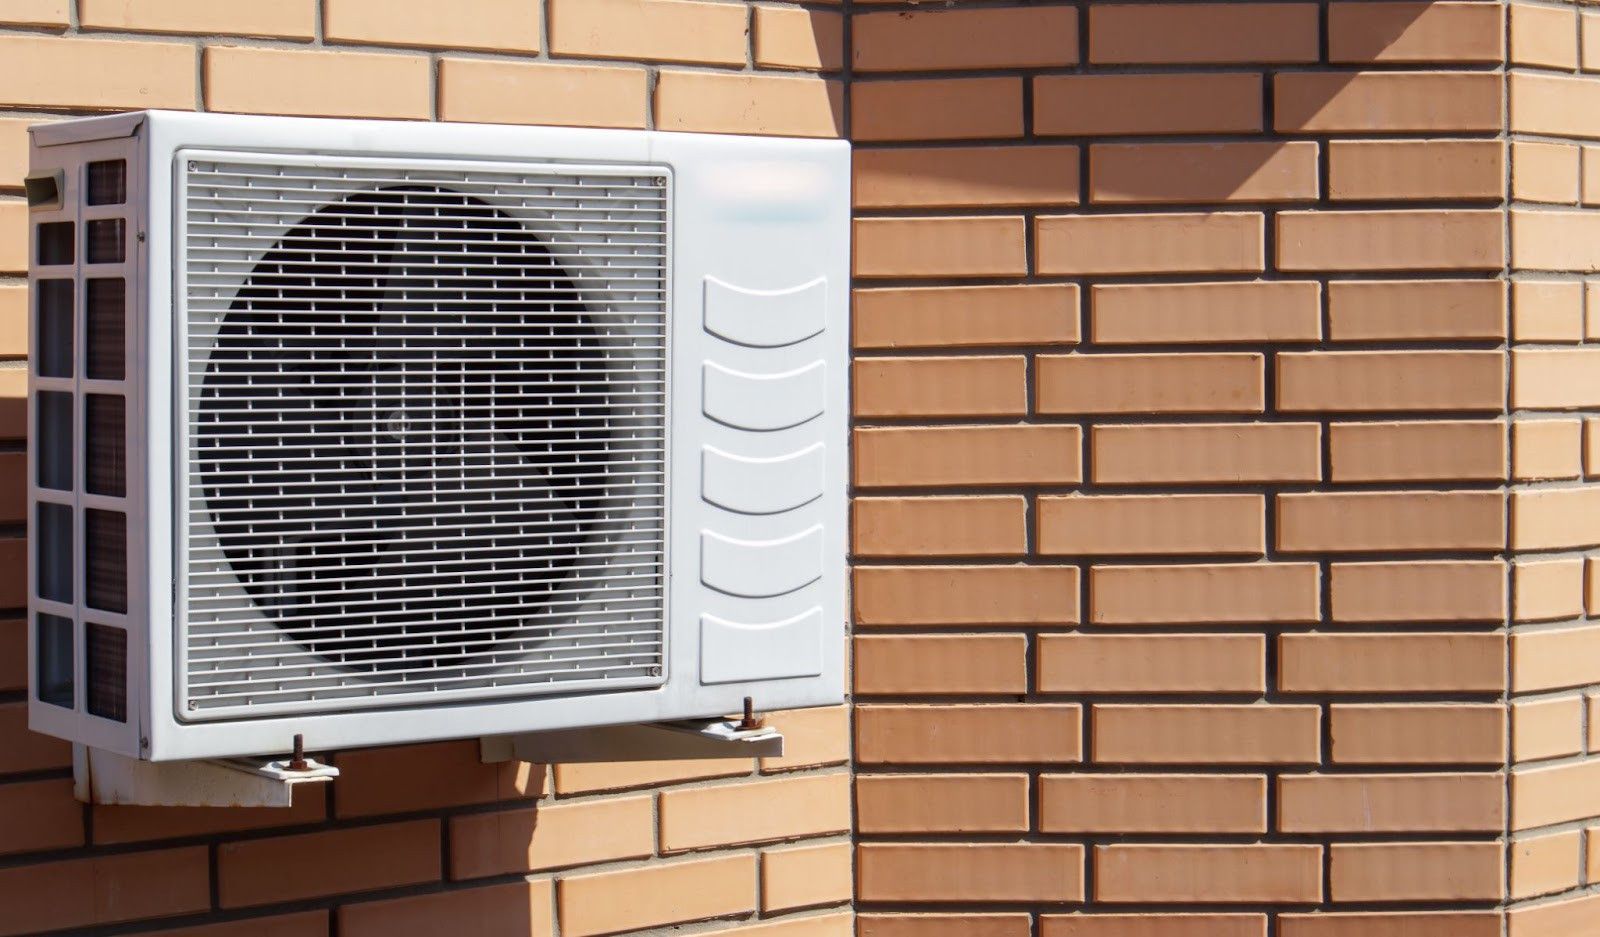 A white air conditioner is mounted on a brick wall.